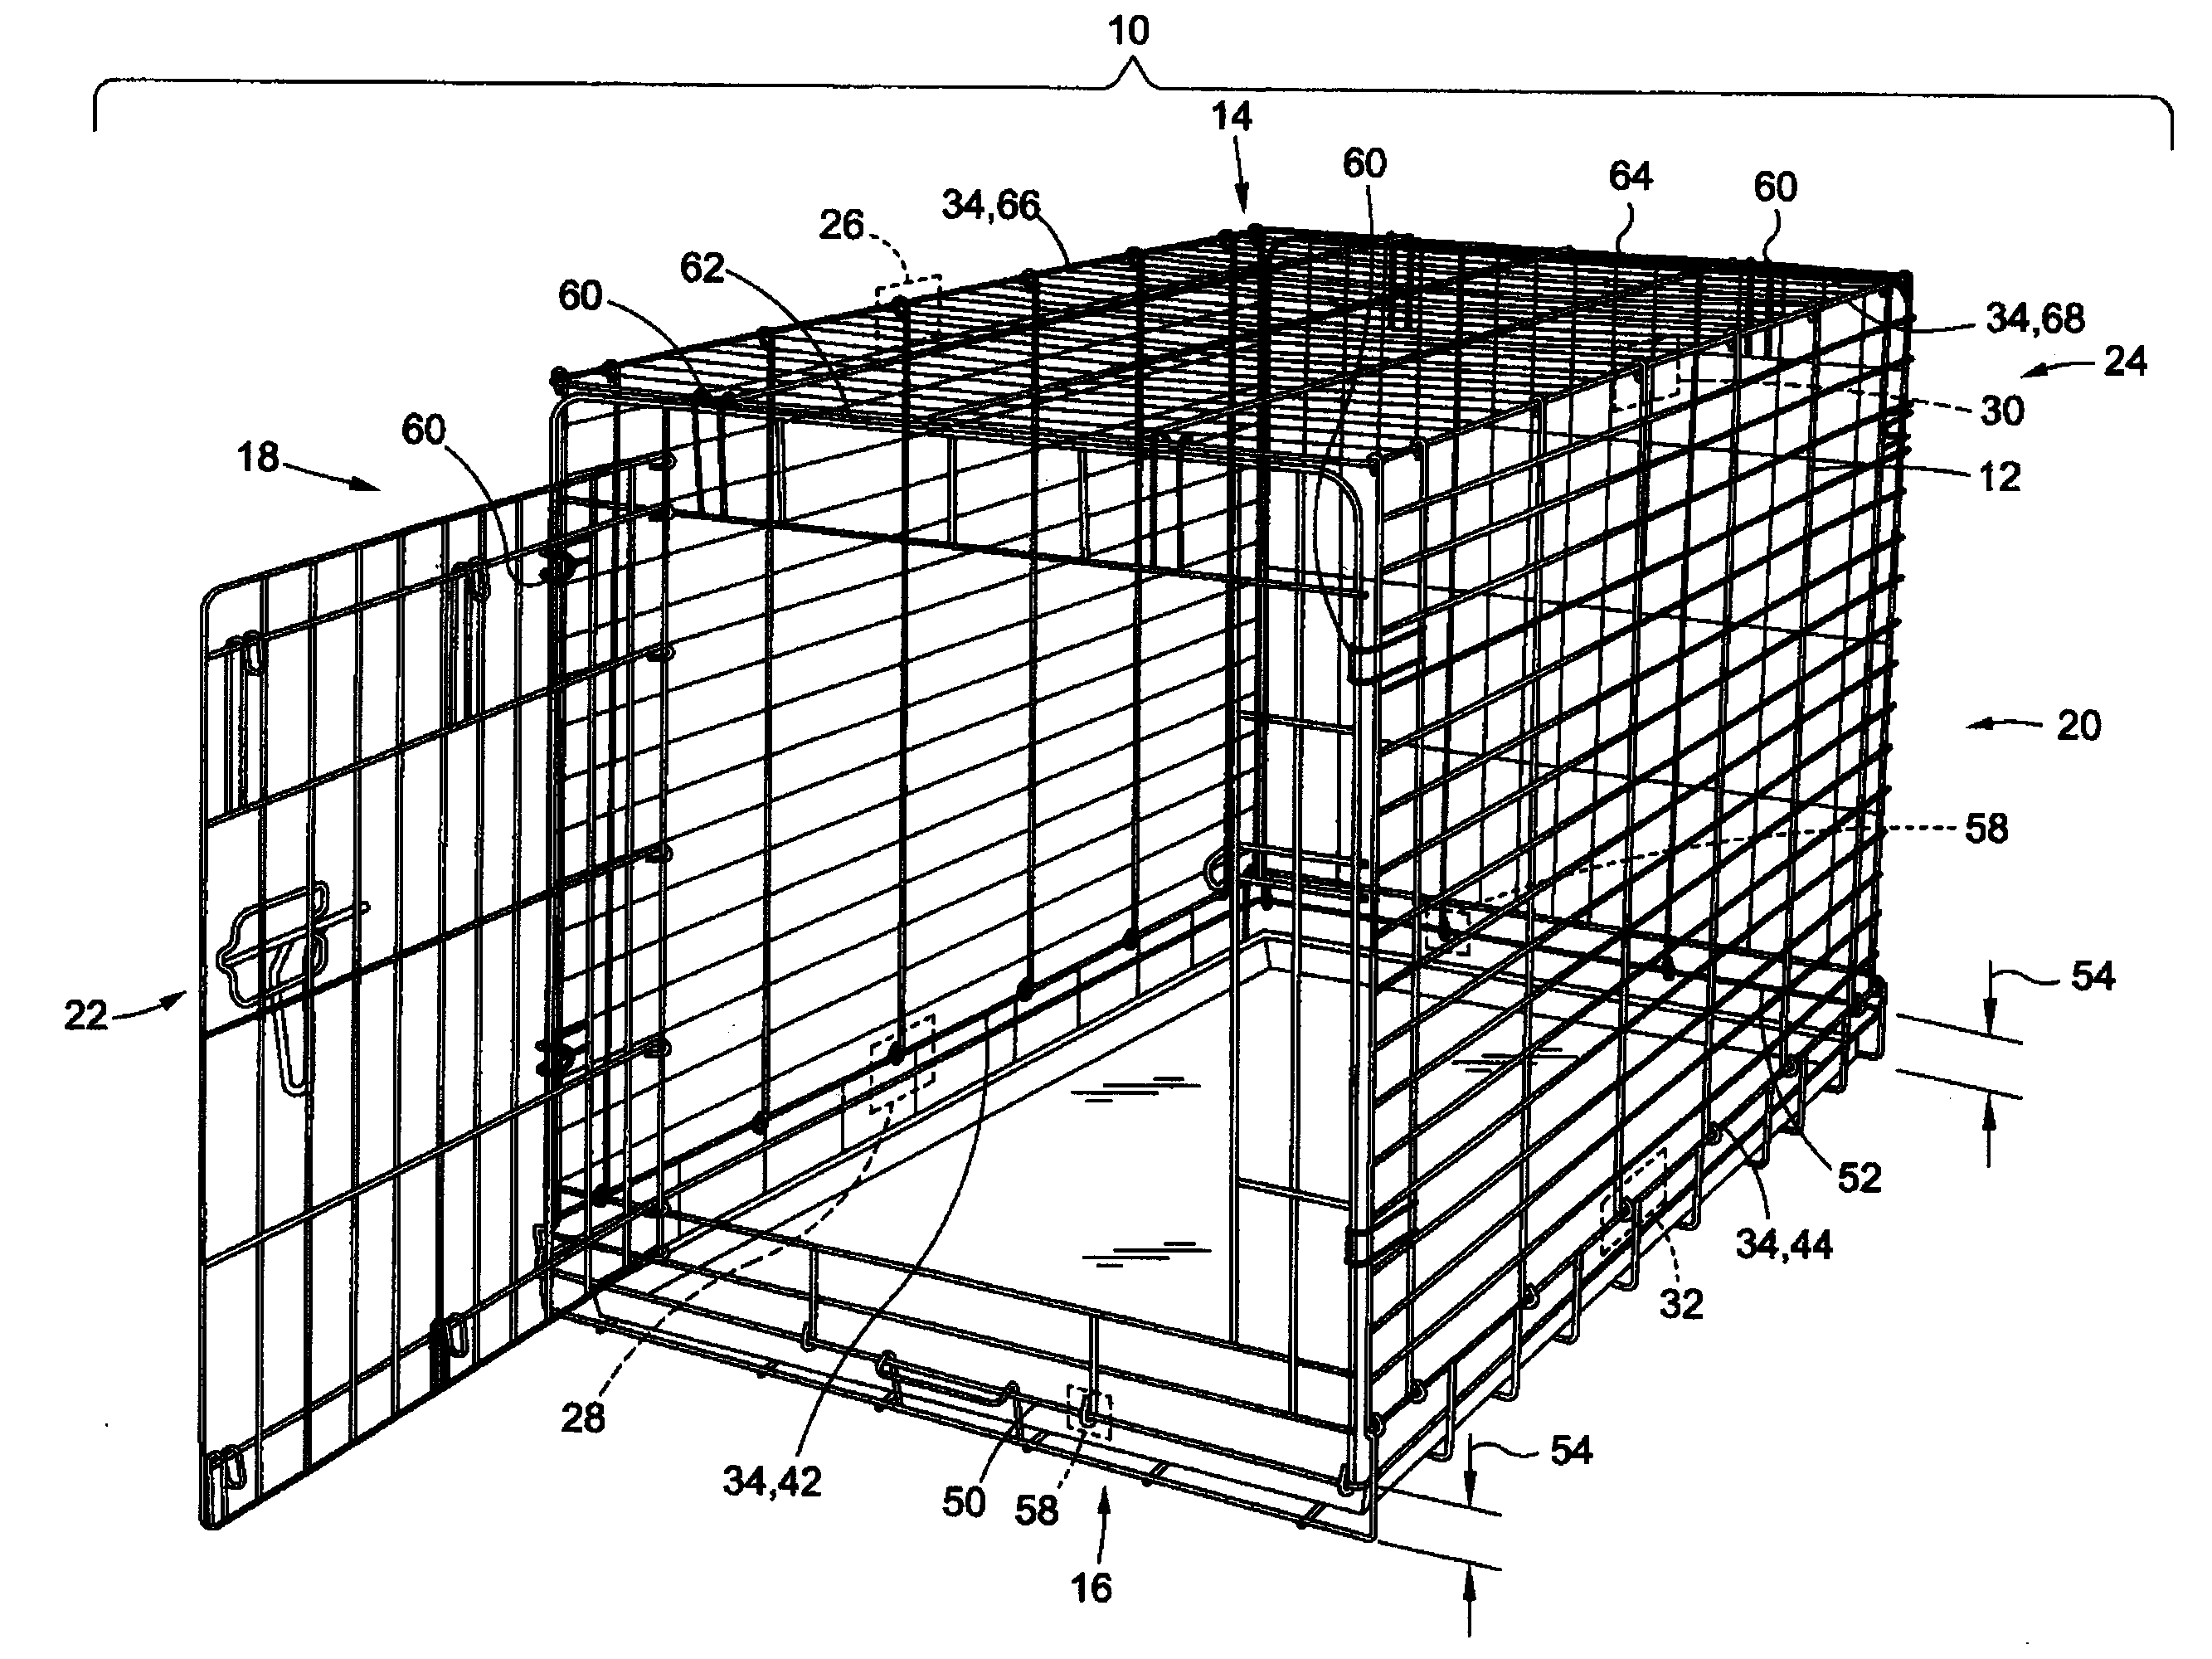 Collapsible animal enclosure